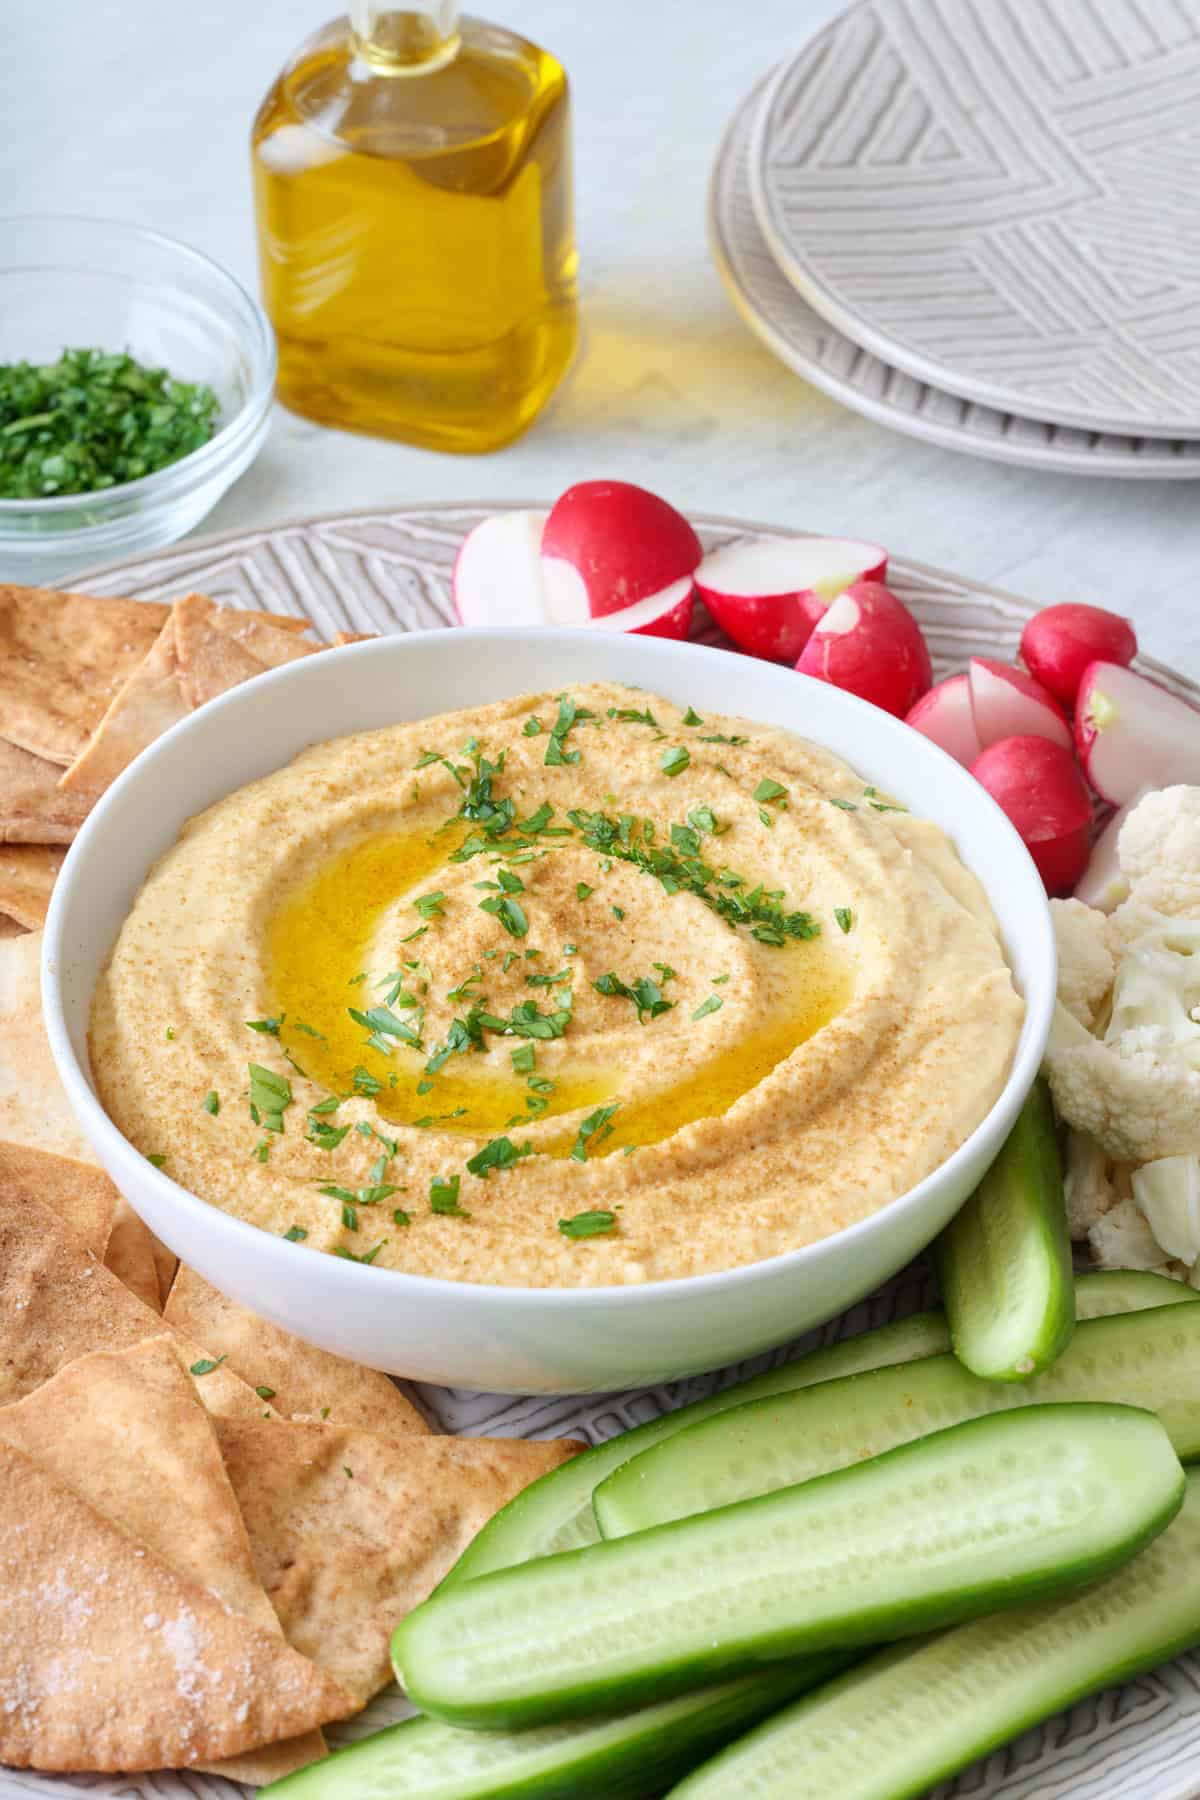 Hummus recipe without tahini in a small white bowl served on a platter with pita chips, cucumbers, radishes, and cauliflower.